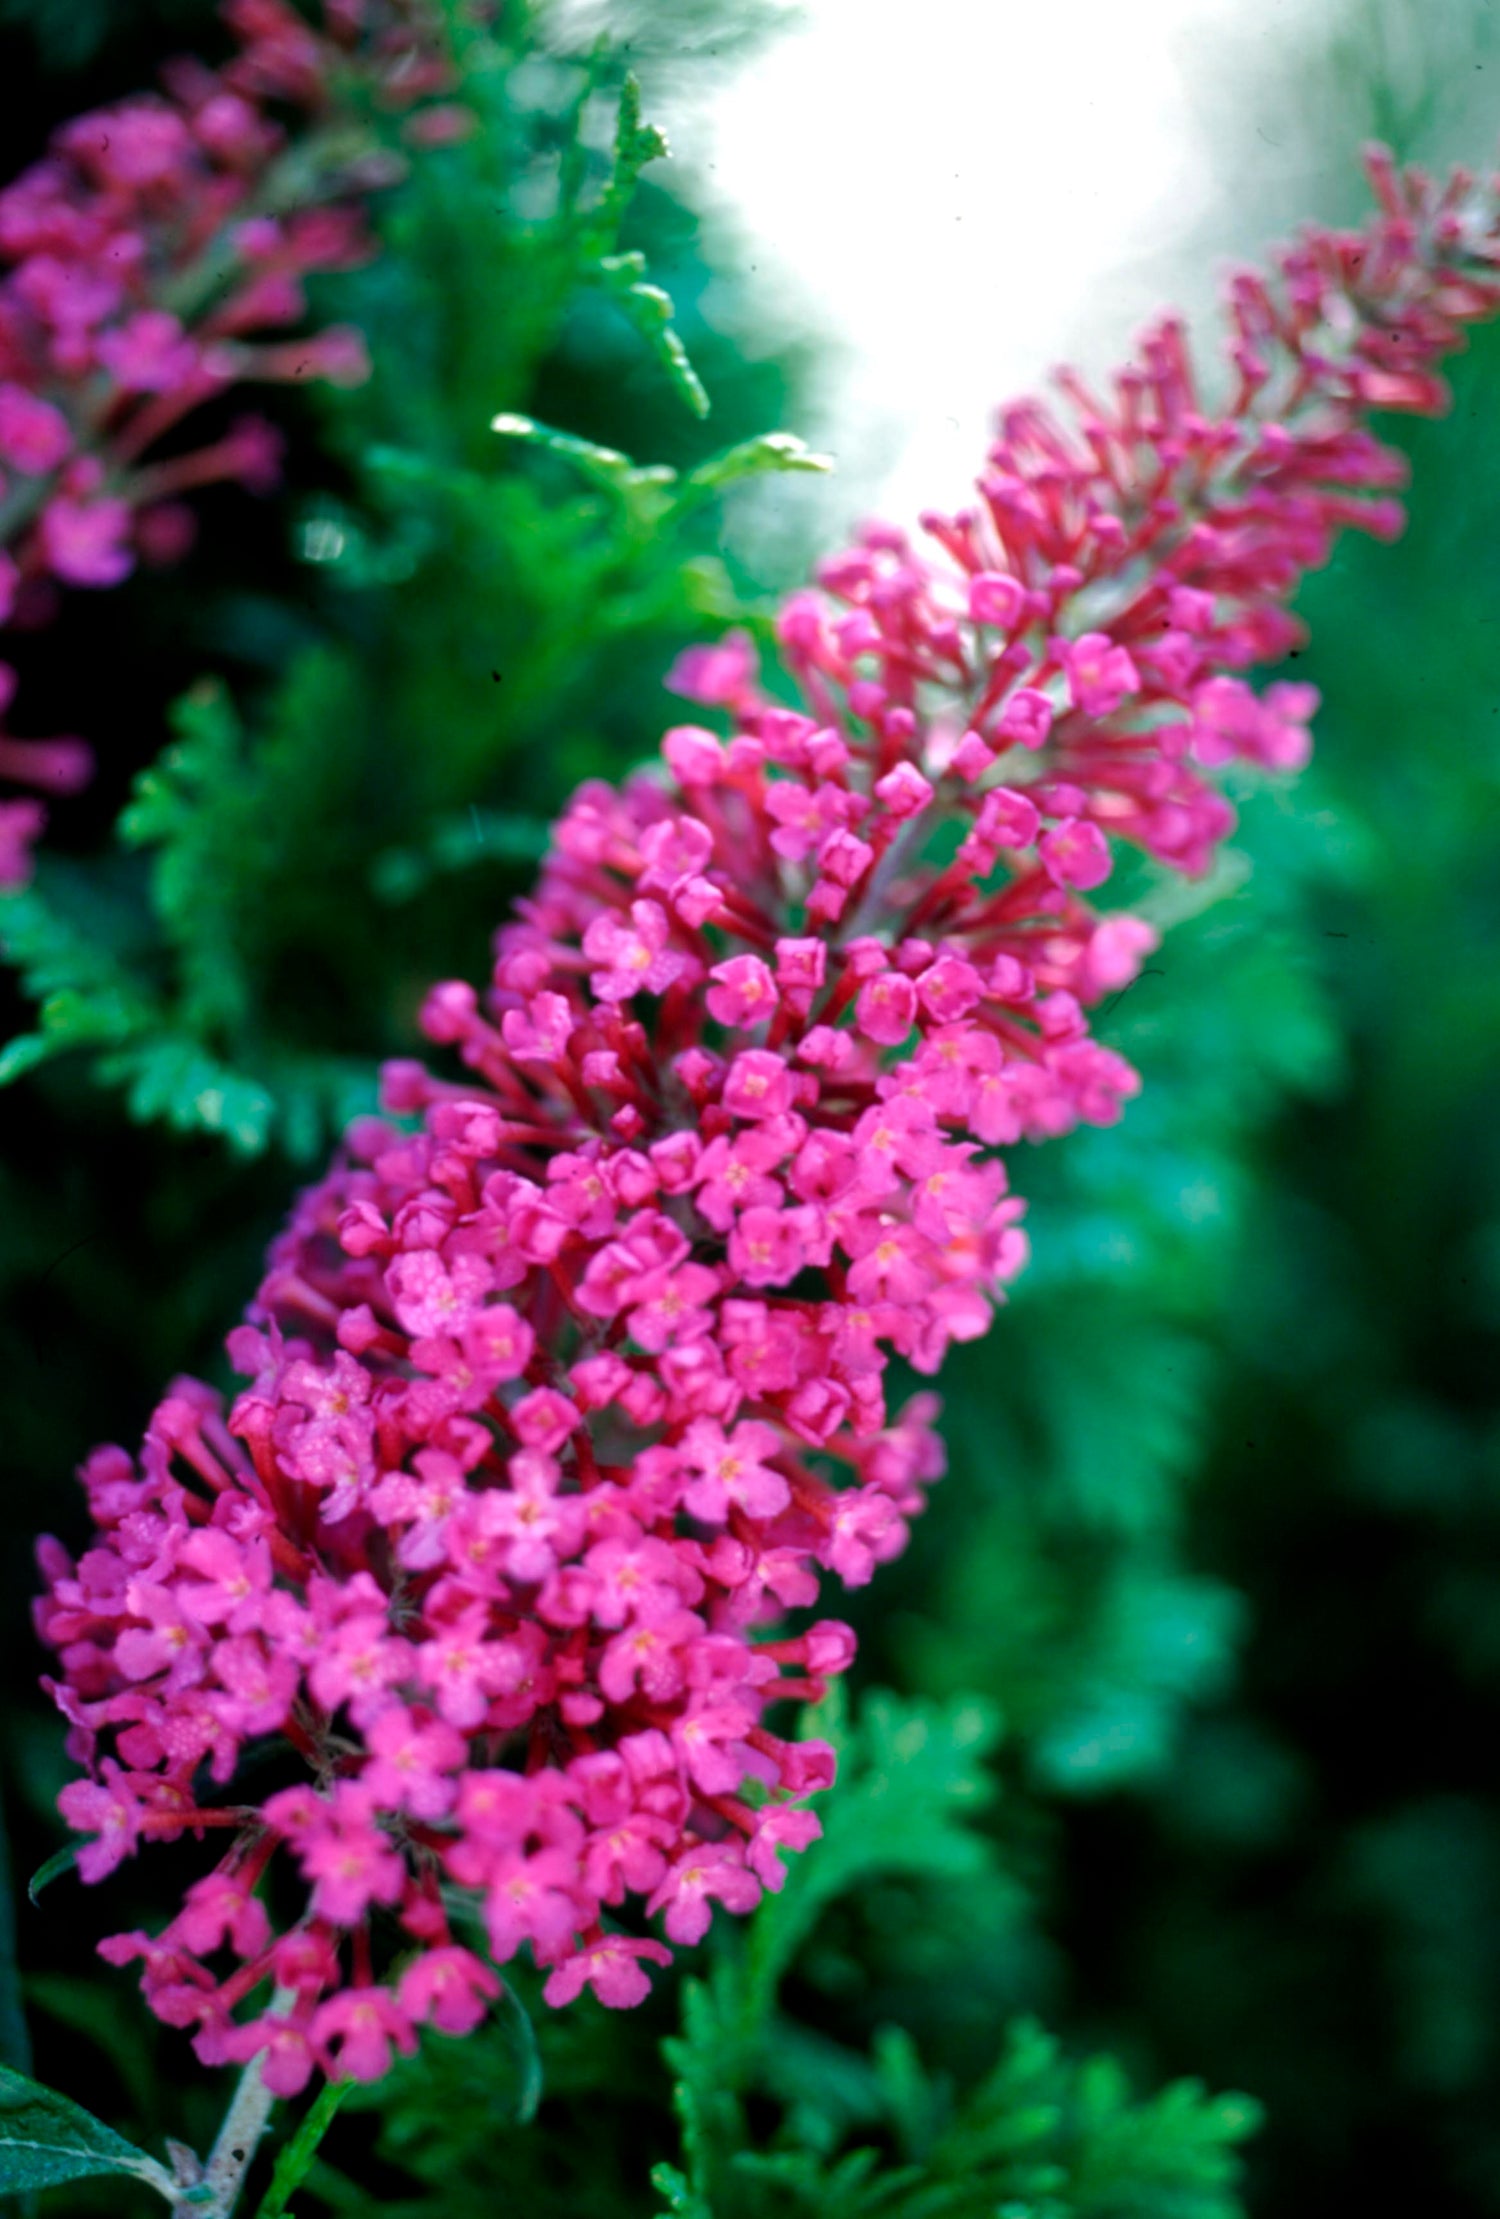 Attraction is a butterfly bush with bright pink flower spikes in summer